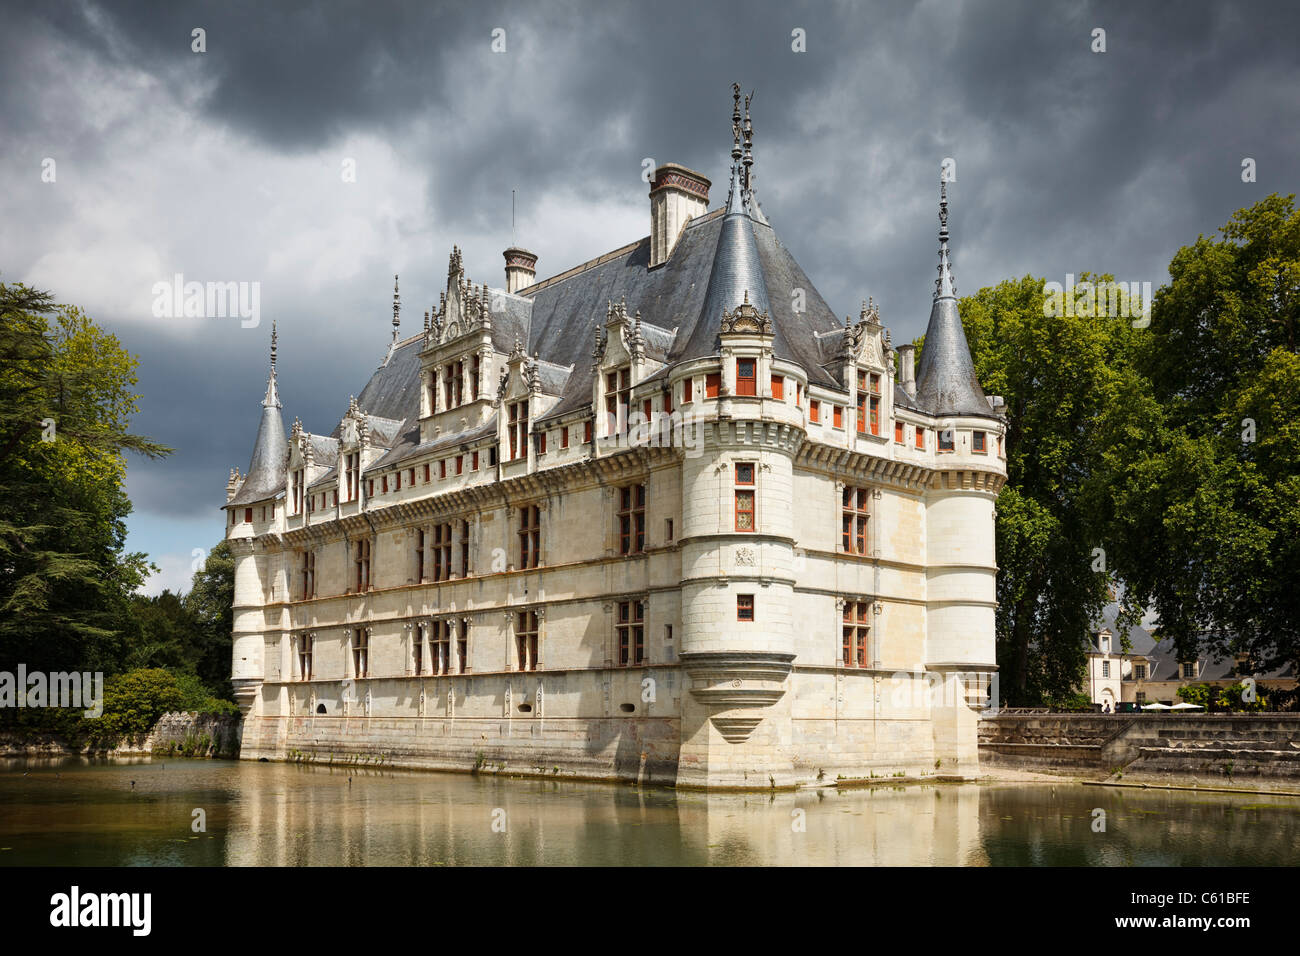 French chateau at Azay-le-Rideau, a typical Loire Chateau, Indre et Loire, Loire Valley, France, Europe in summer Stock Photo